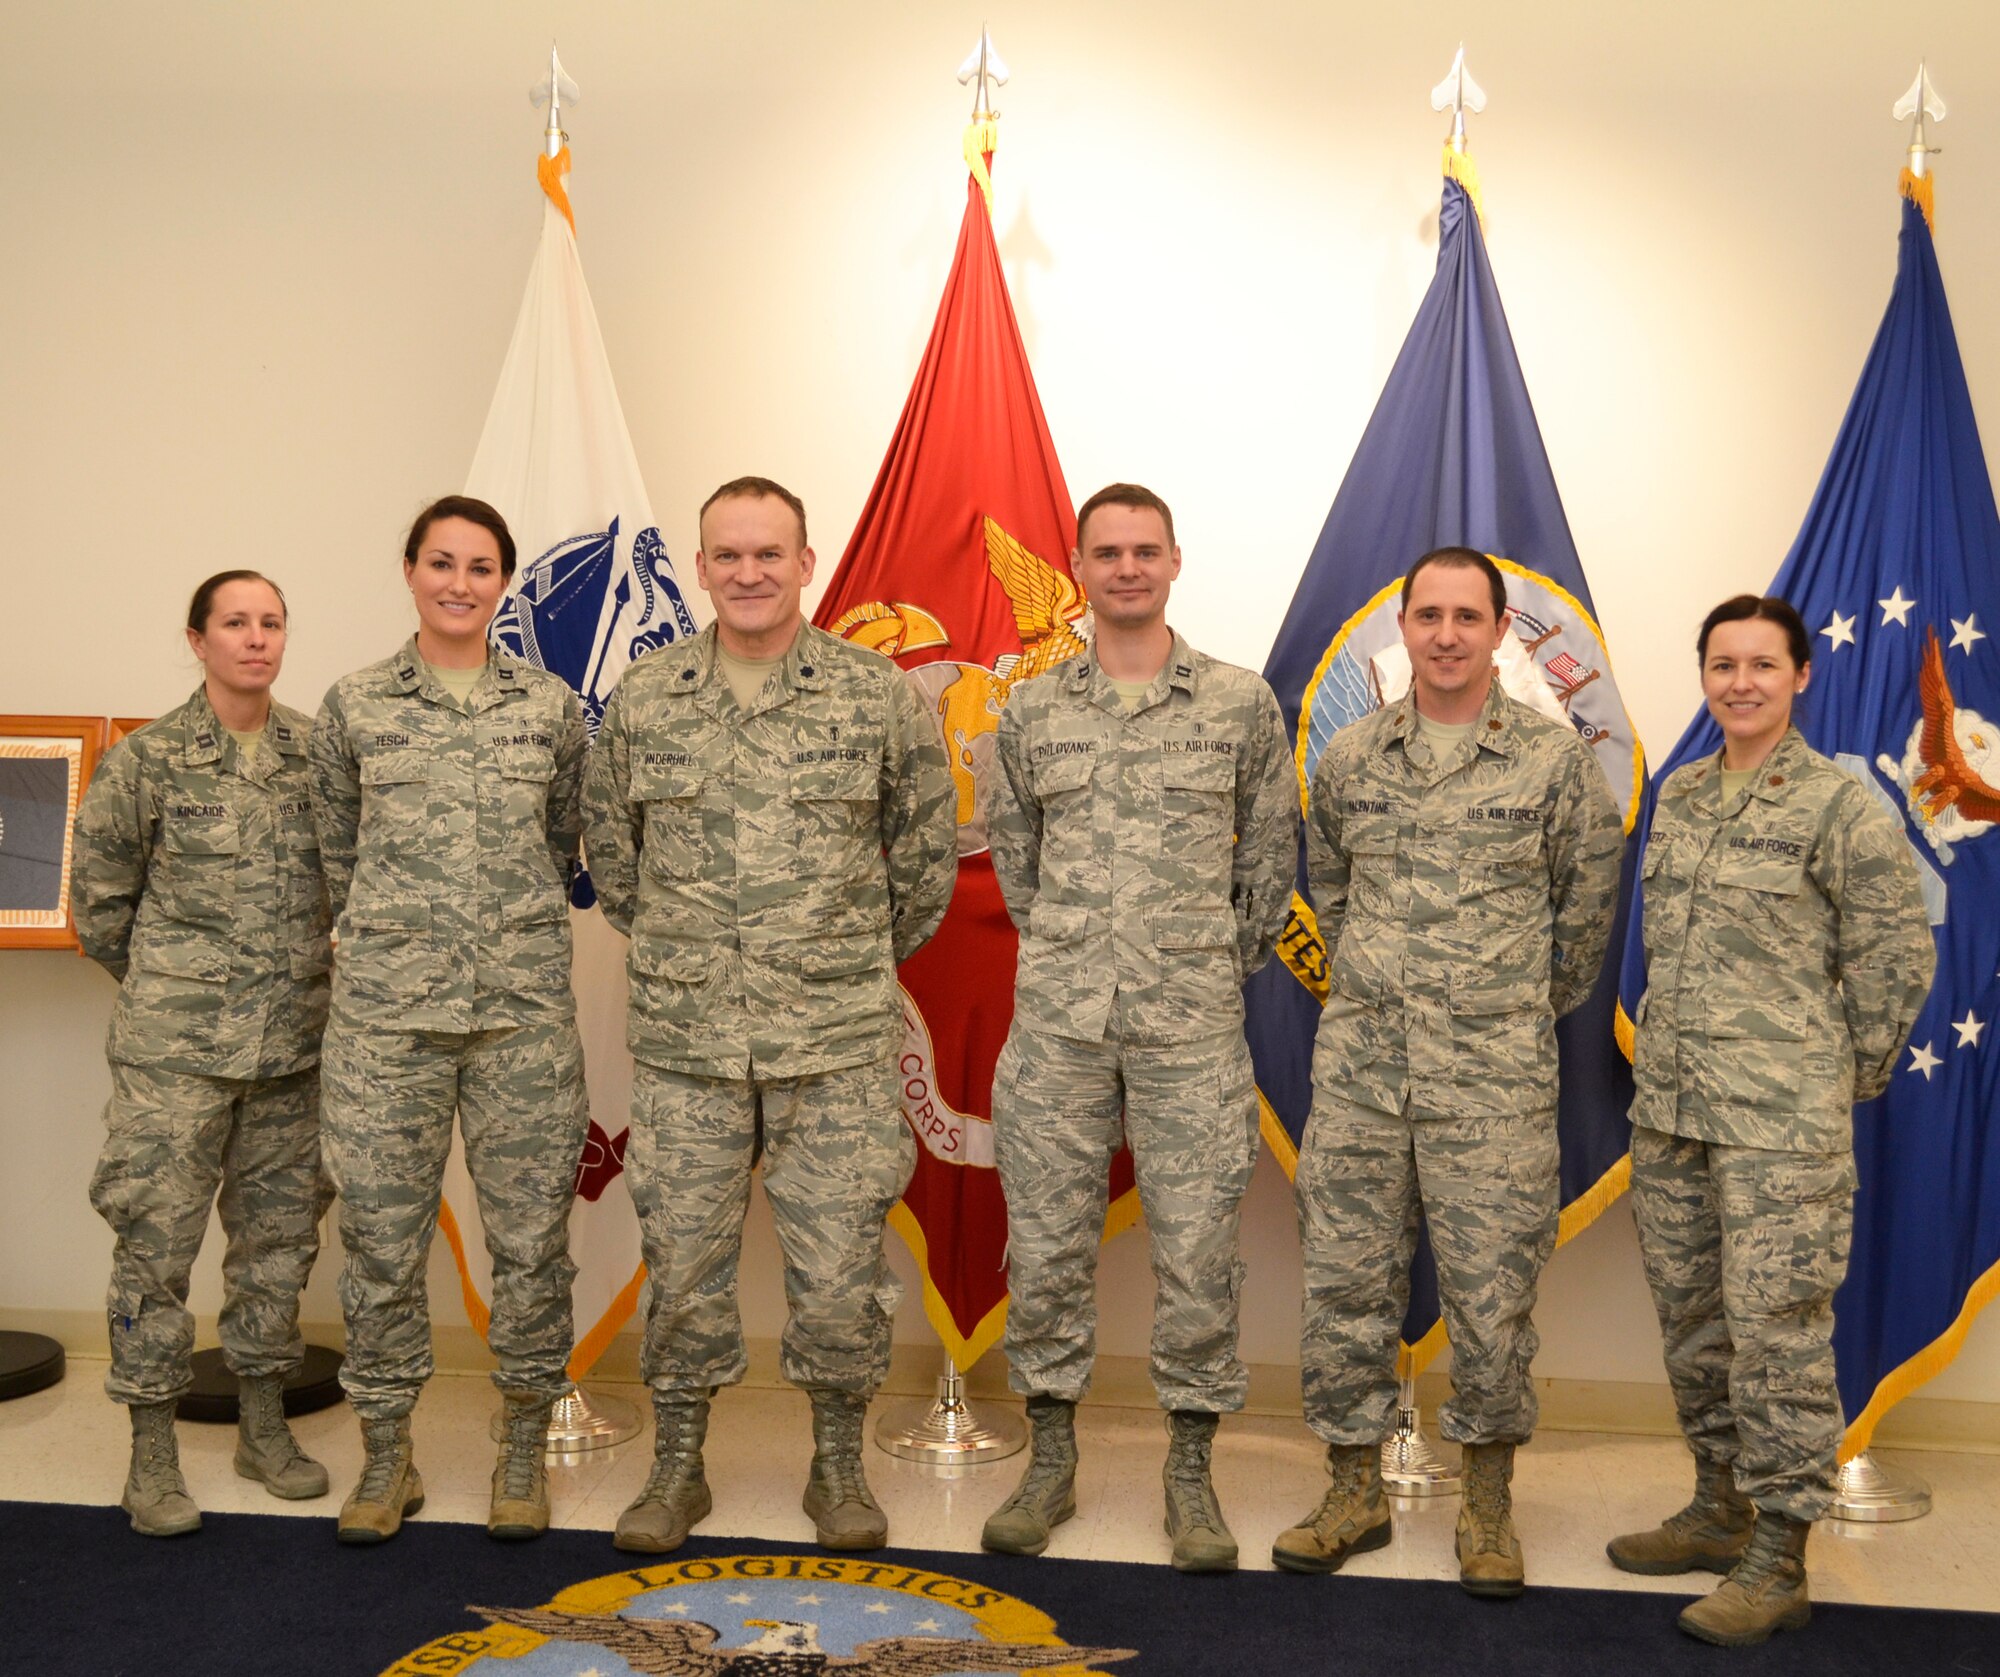 The Air Force Pharmacy Residency Program pharmacists pose with Lt. Col. Derek Underhill, left center, Customer Pharmacy Operations Center branch chief, for a group photo at DLA Troop Support in Philadelphia, Feb. 7, 2018. The residents visited DLA Troop Support to learn about pharmaceutical operations support as part of their two-week National Capitol Region rotation. (U.S. Air Force photo by Shaun Eagan)